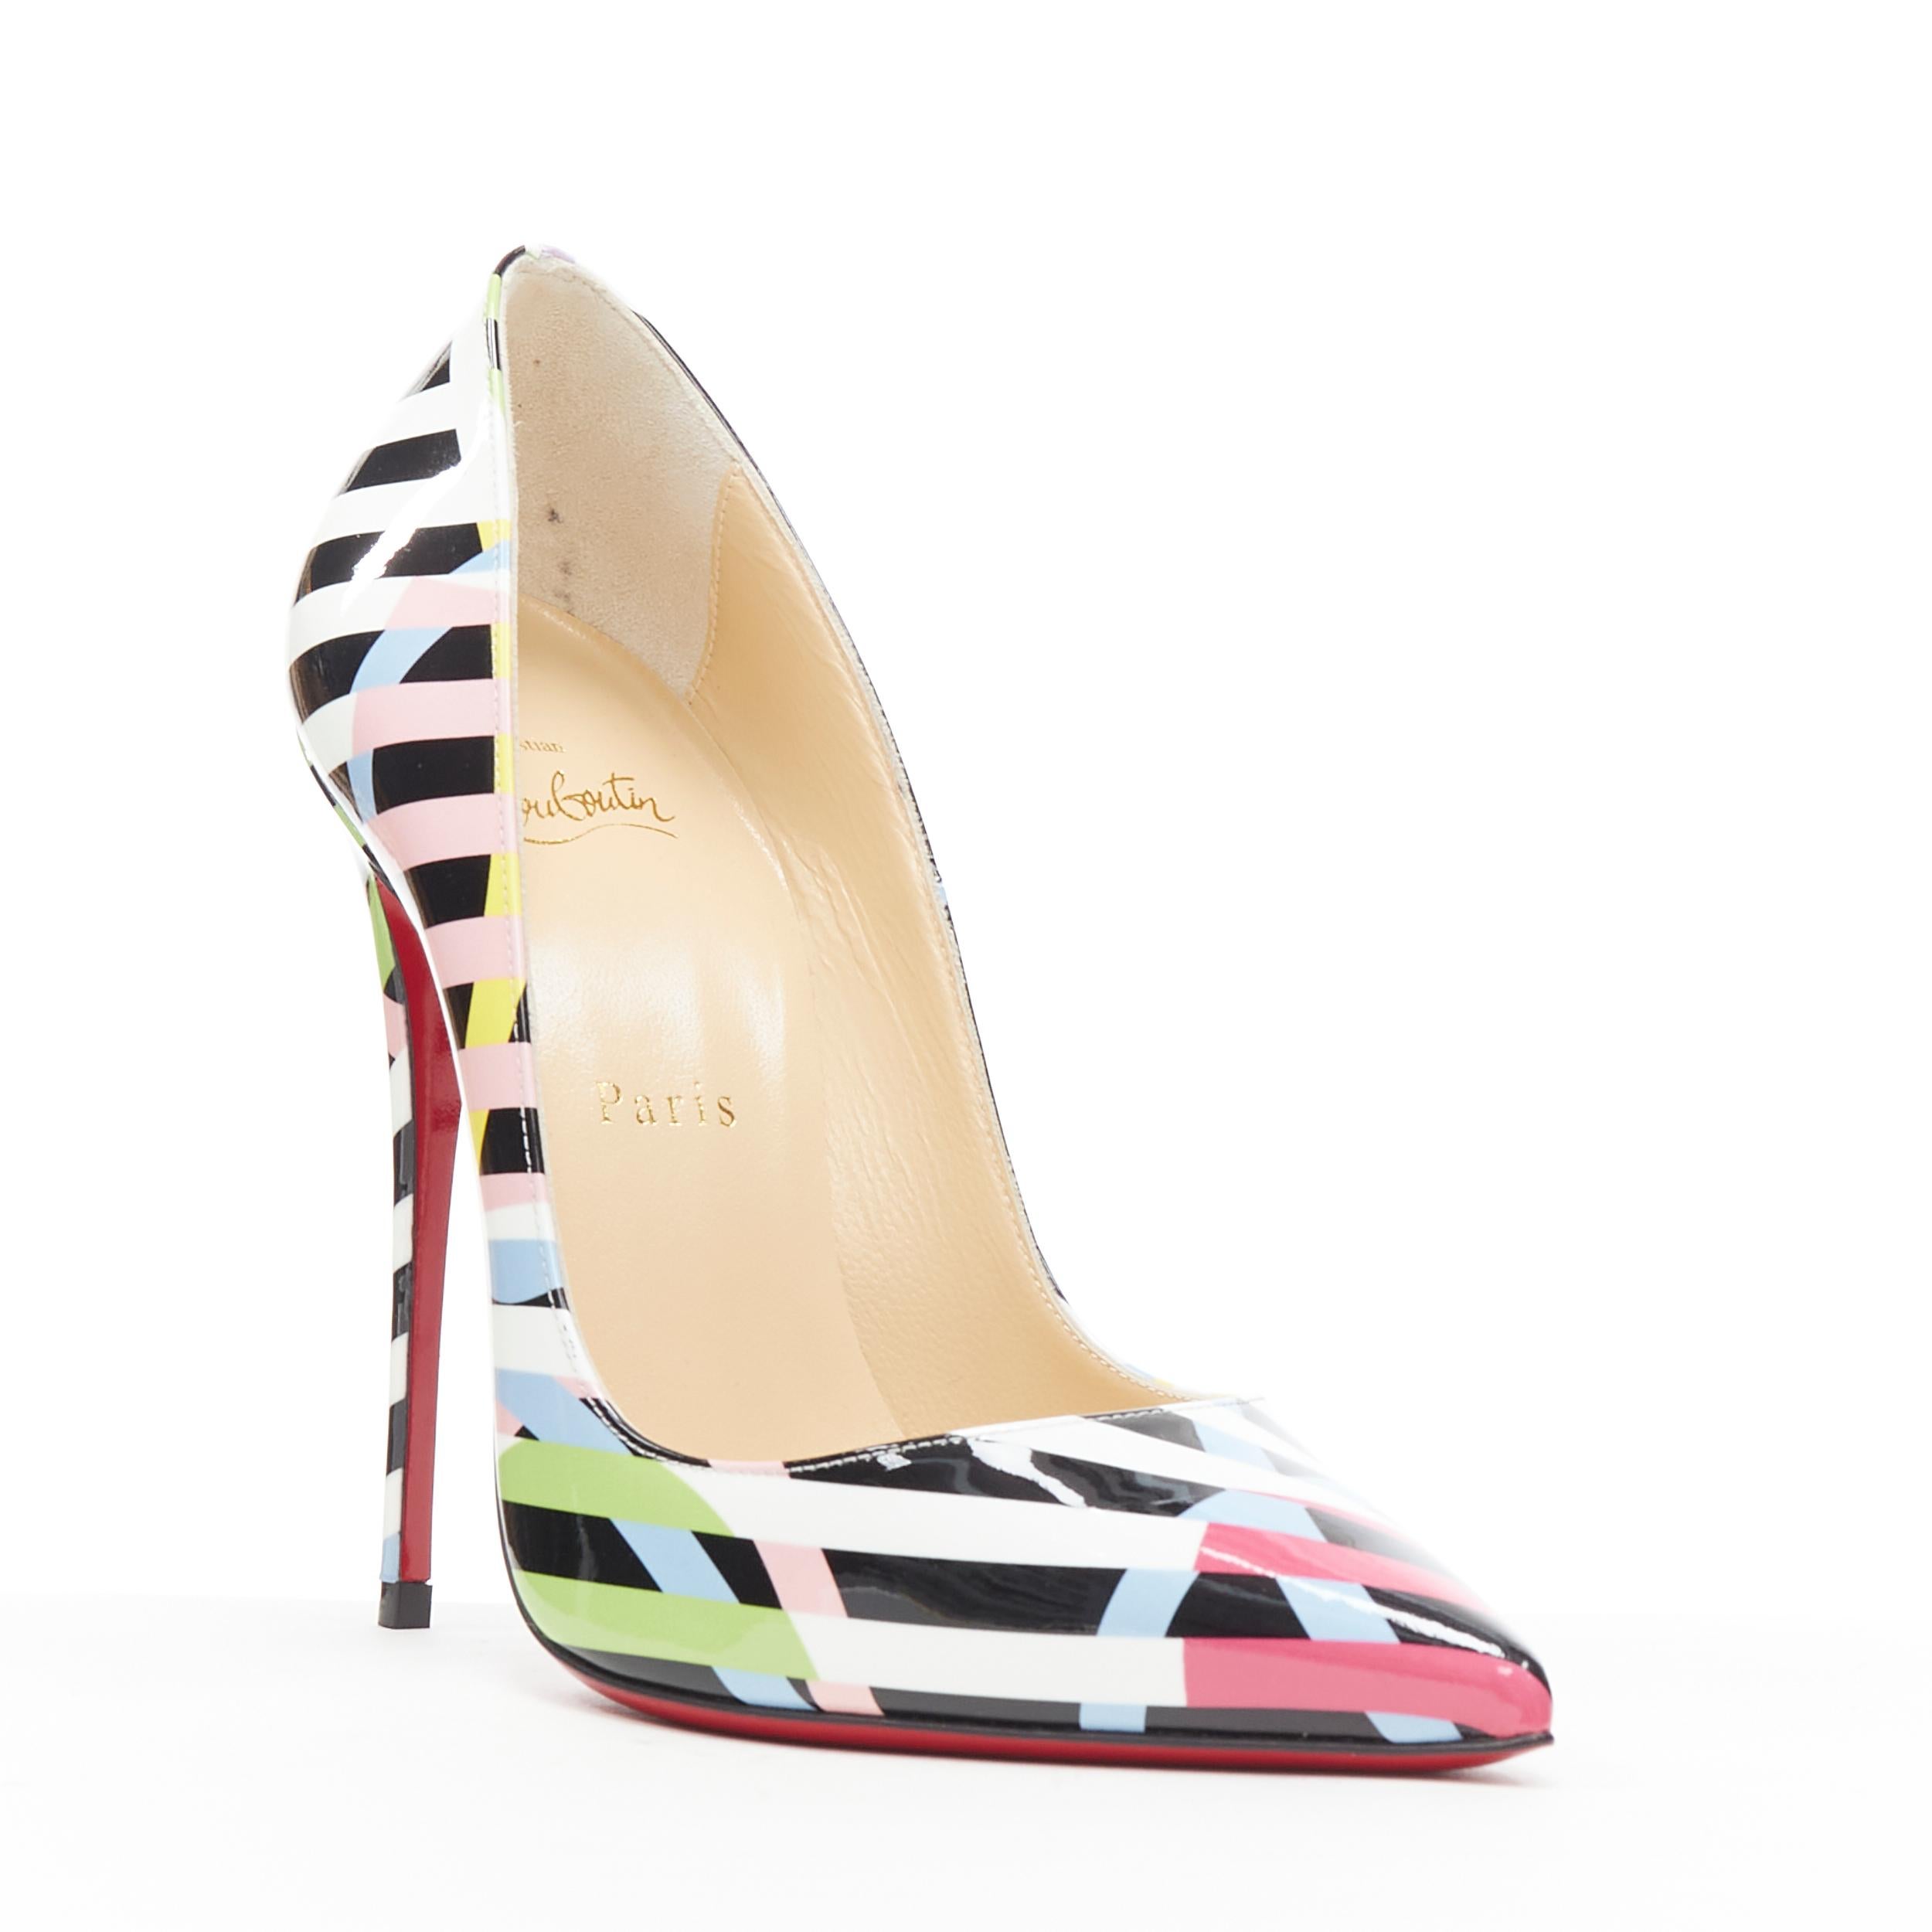 new CHRISTIAN LOUBOUTIN So Kate 120 Cinestripes patent stiletto Pigalle EU36.5 
Reference: TGAS/B00135 
Brand: Christian Louboutin 
Designer: Christian Louboutin 
Model: So Kate 120 
Material: Patent leather 
Color: Multicolour 
Pattern: Striped